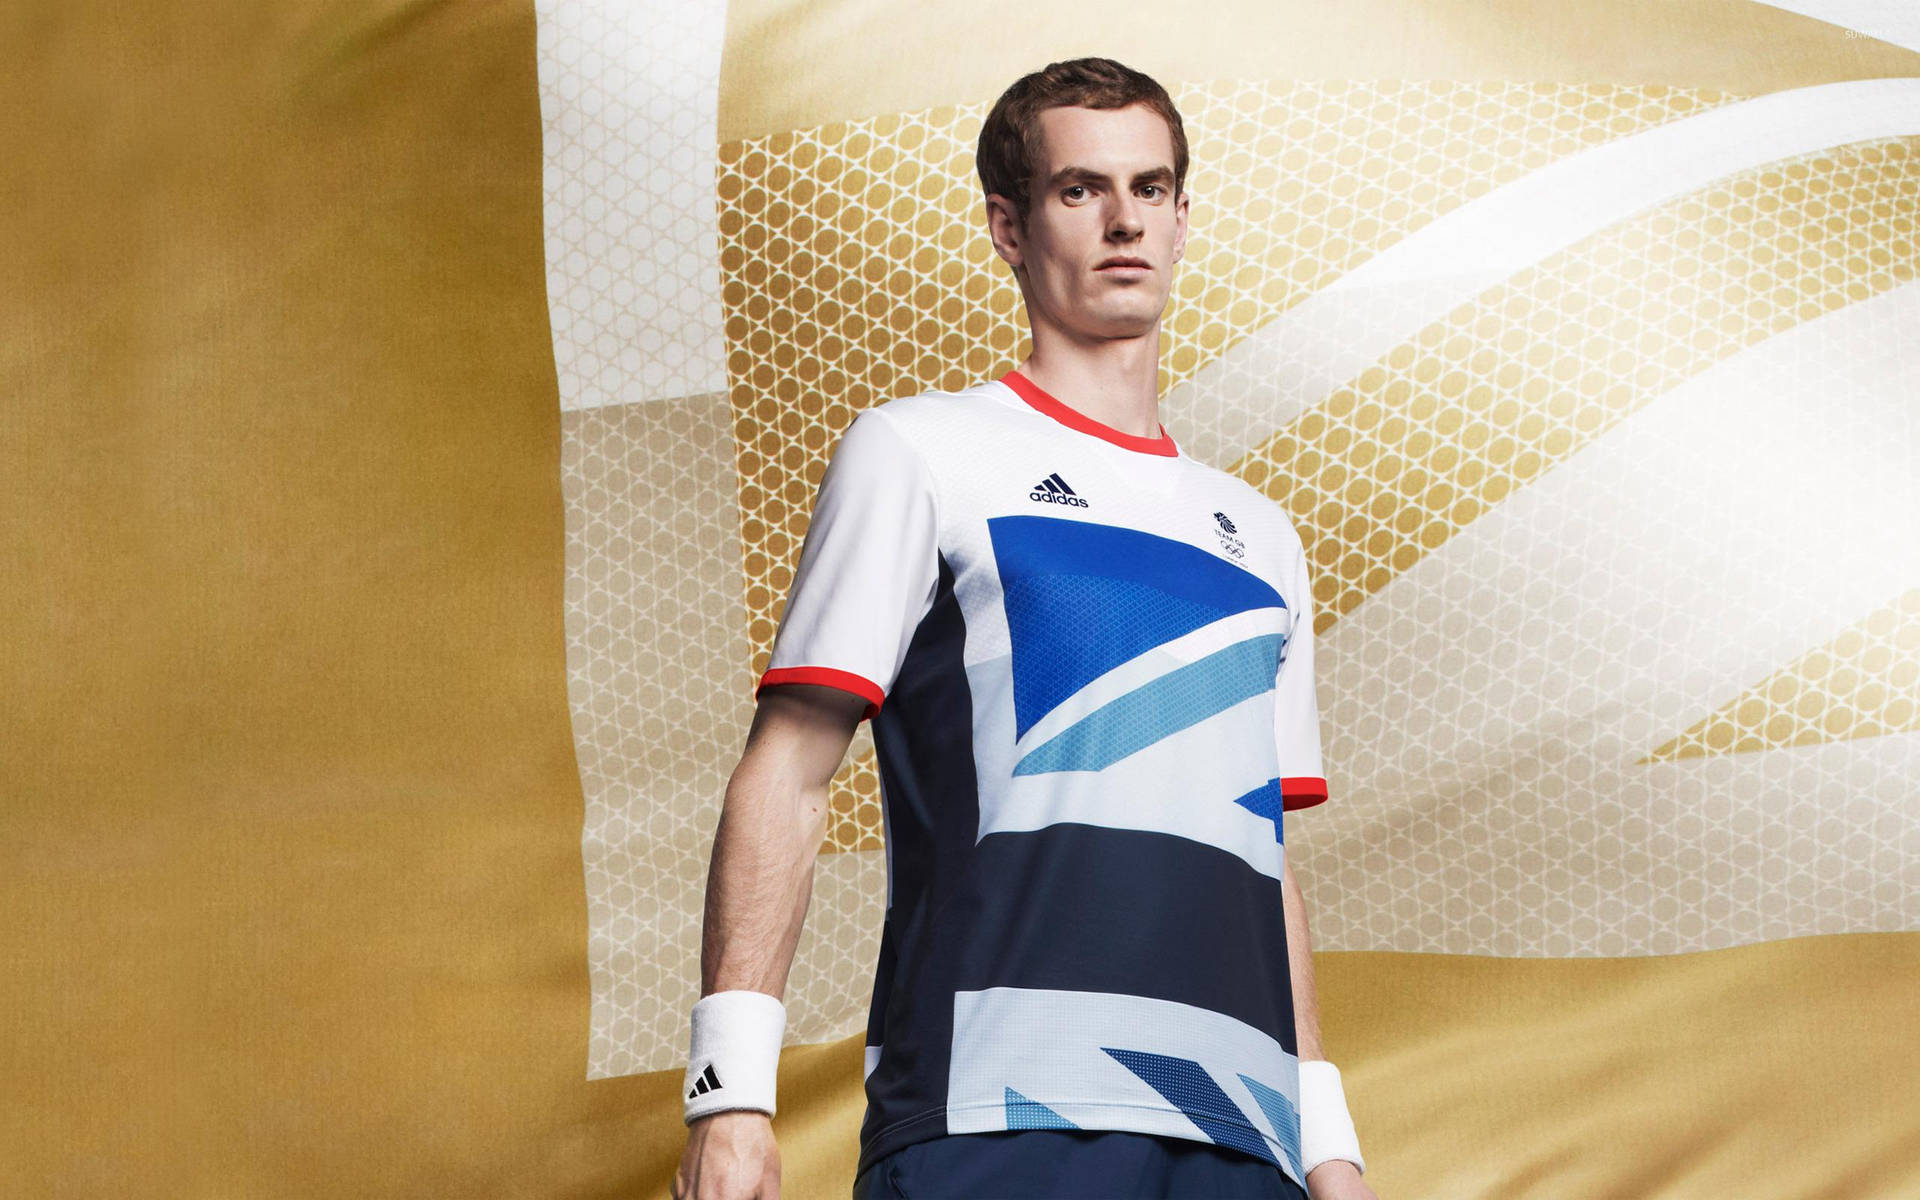 Andy Murray In Adidas Athleisure Outfit Background